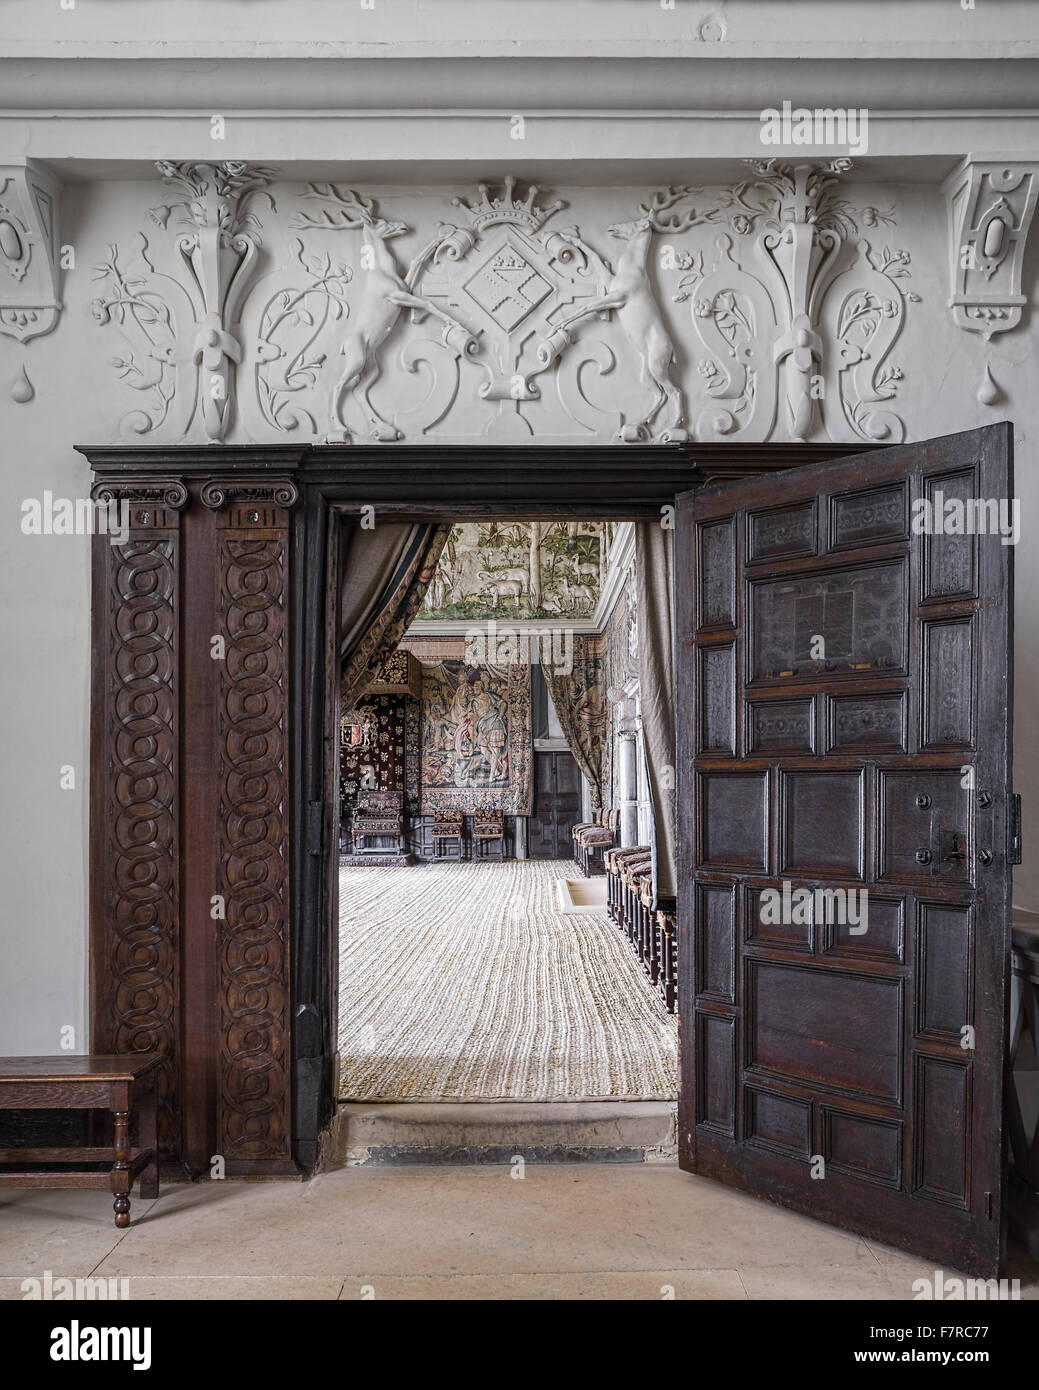 View from the landing through the door into the High Great Chamber at Hardwick Hall, Derbyshire. Hardwick Hall was built in the late 16th century for Bess of Hardwick. Stock Photo